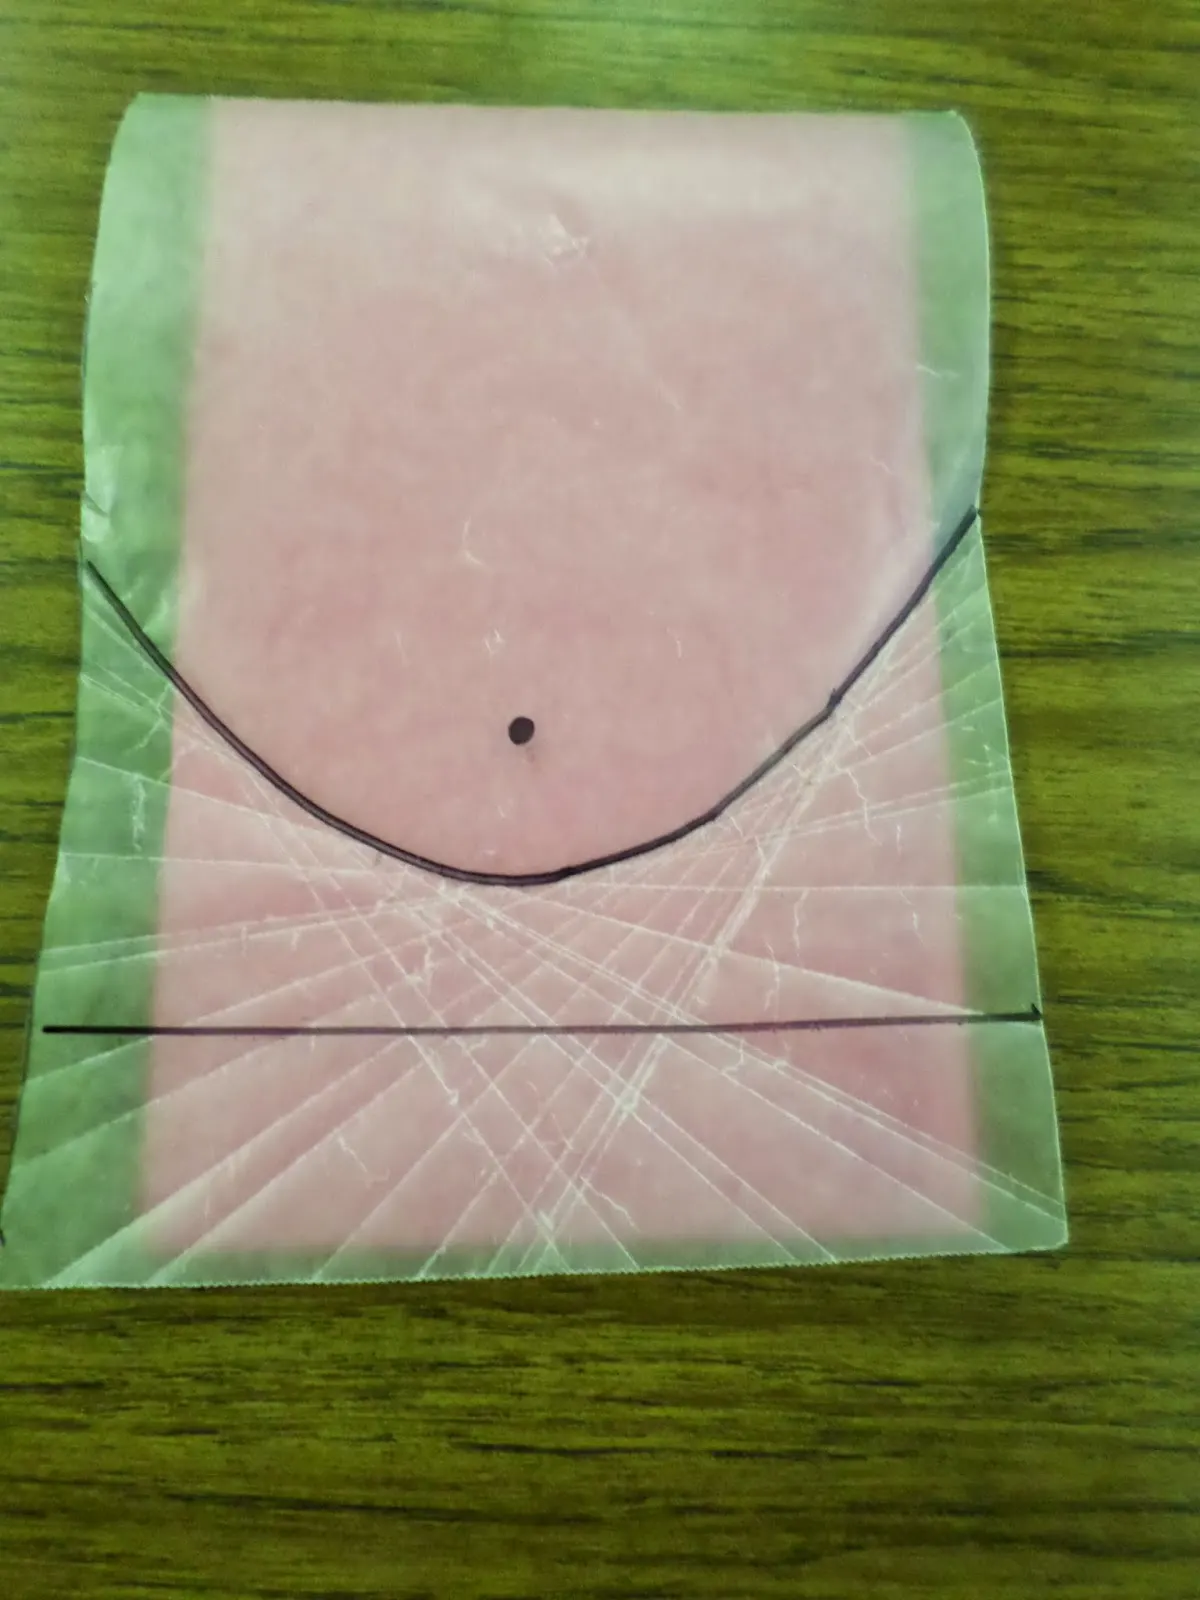 Wax Paper Parabolas - Hands on Activity for Introducing Parabolas in Quadratics or Conics Conic Sections Unit